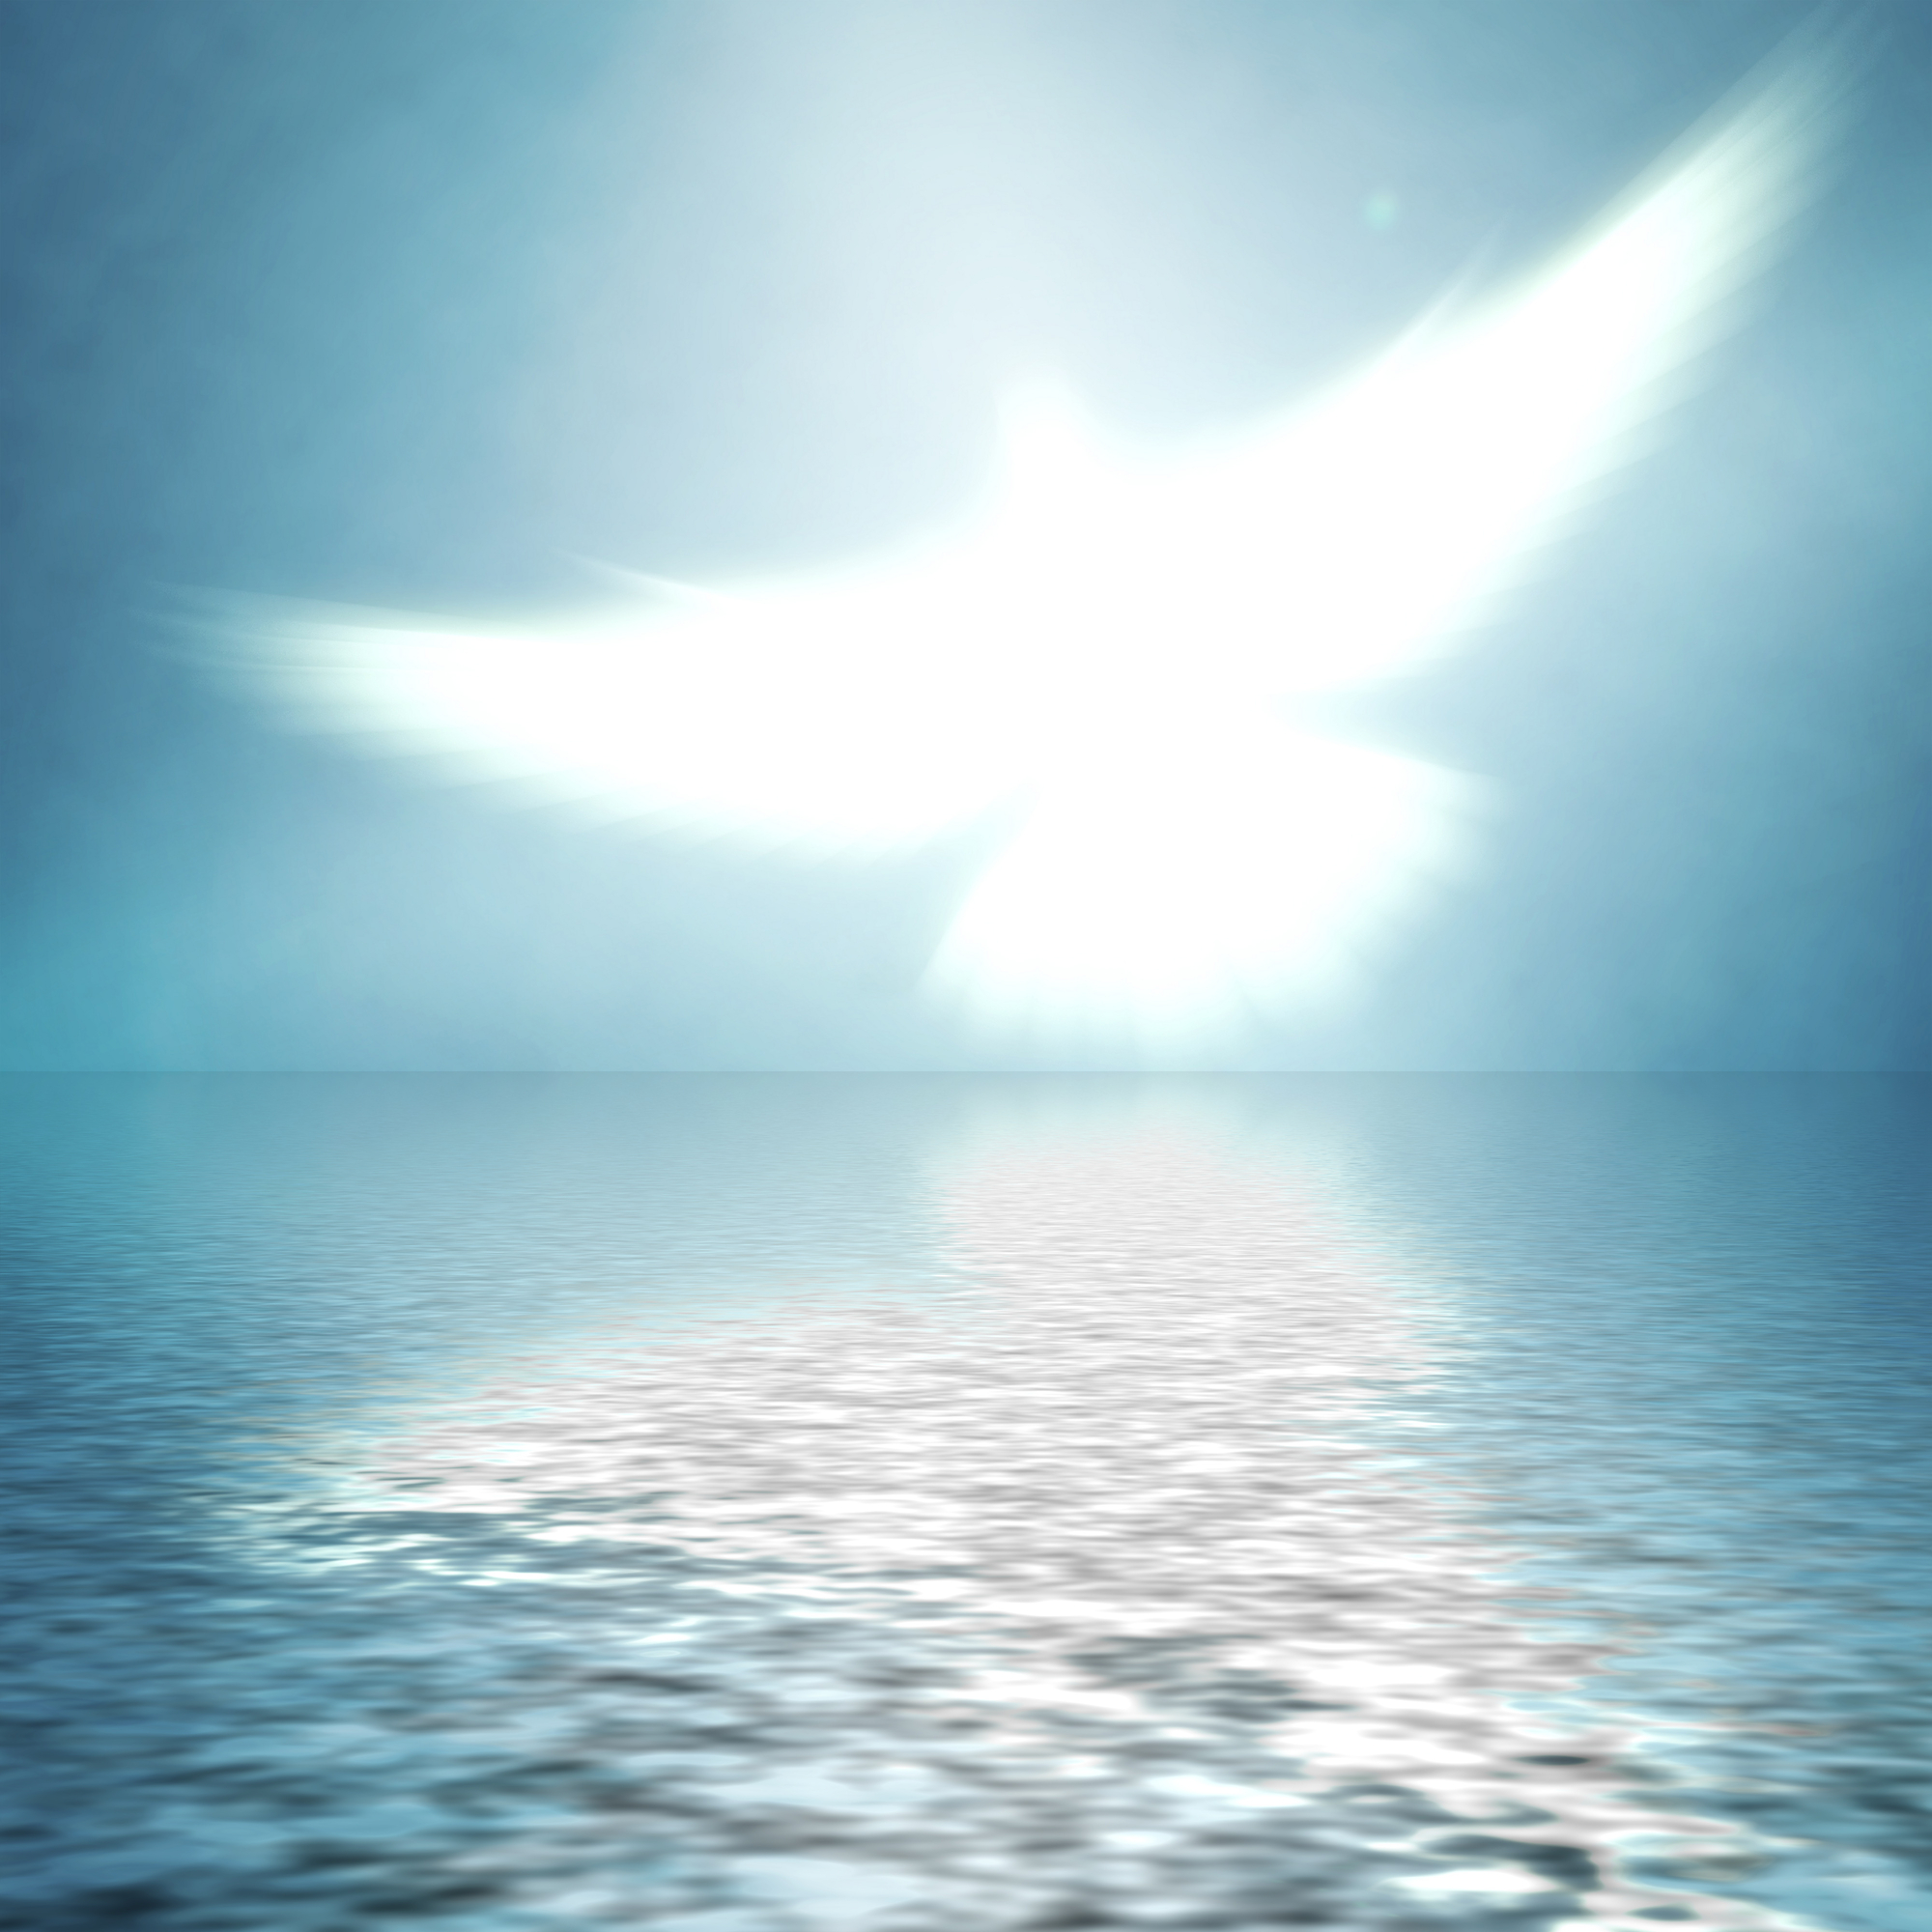 WHAT HAPPENS WHEN THE HOLY SPIRIT COMES UPON A PERSON? - 8/14/2022